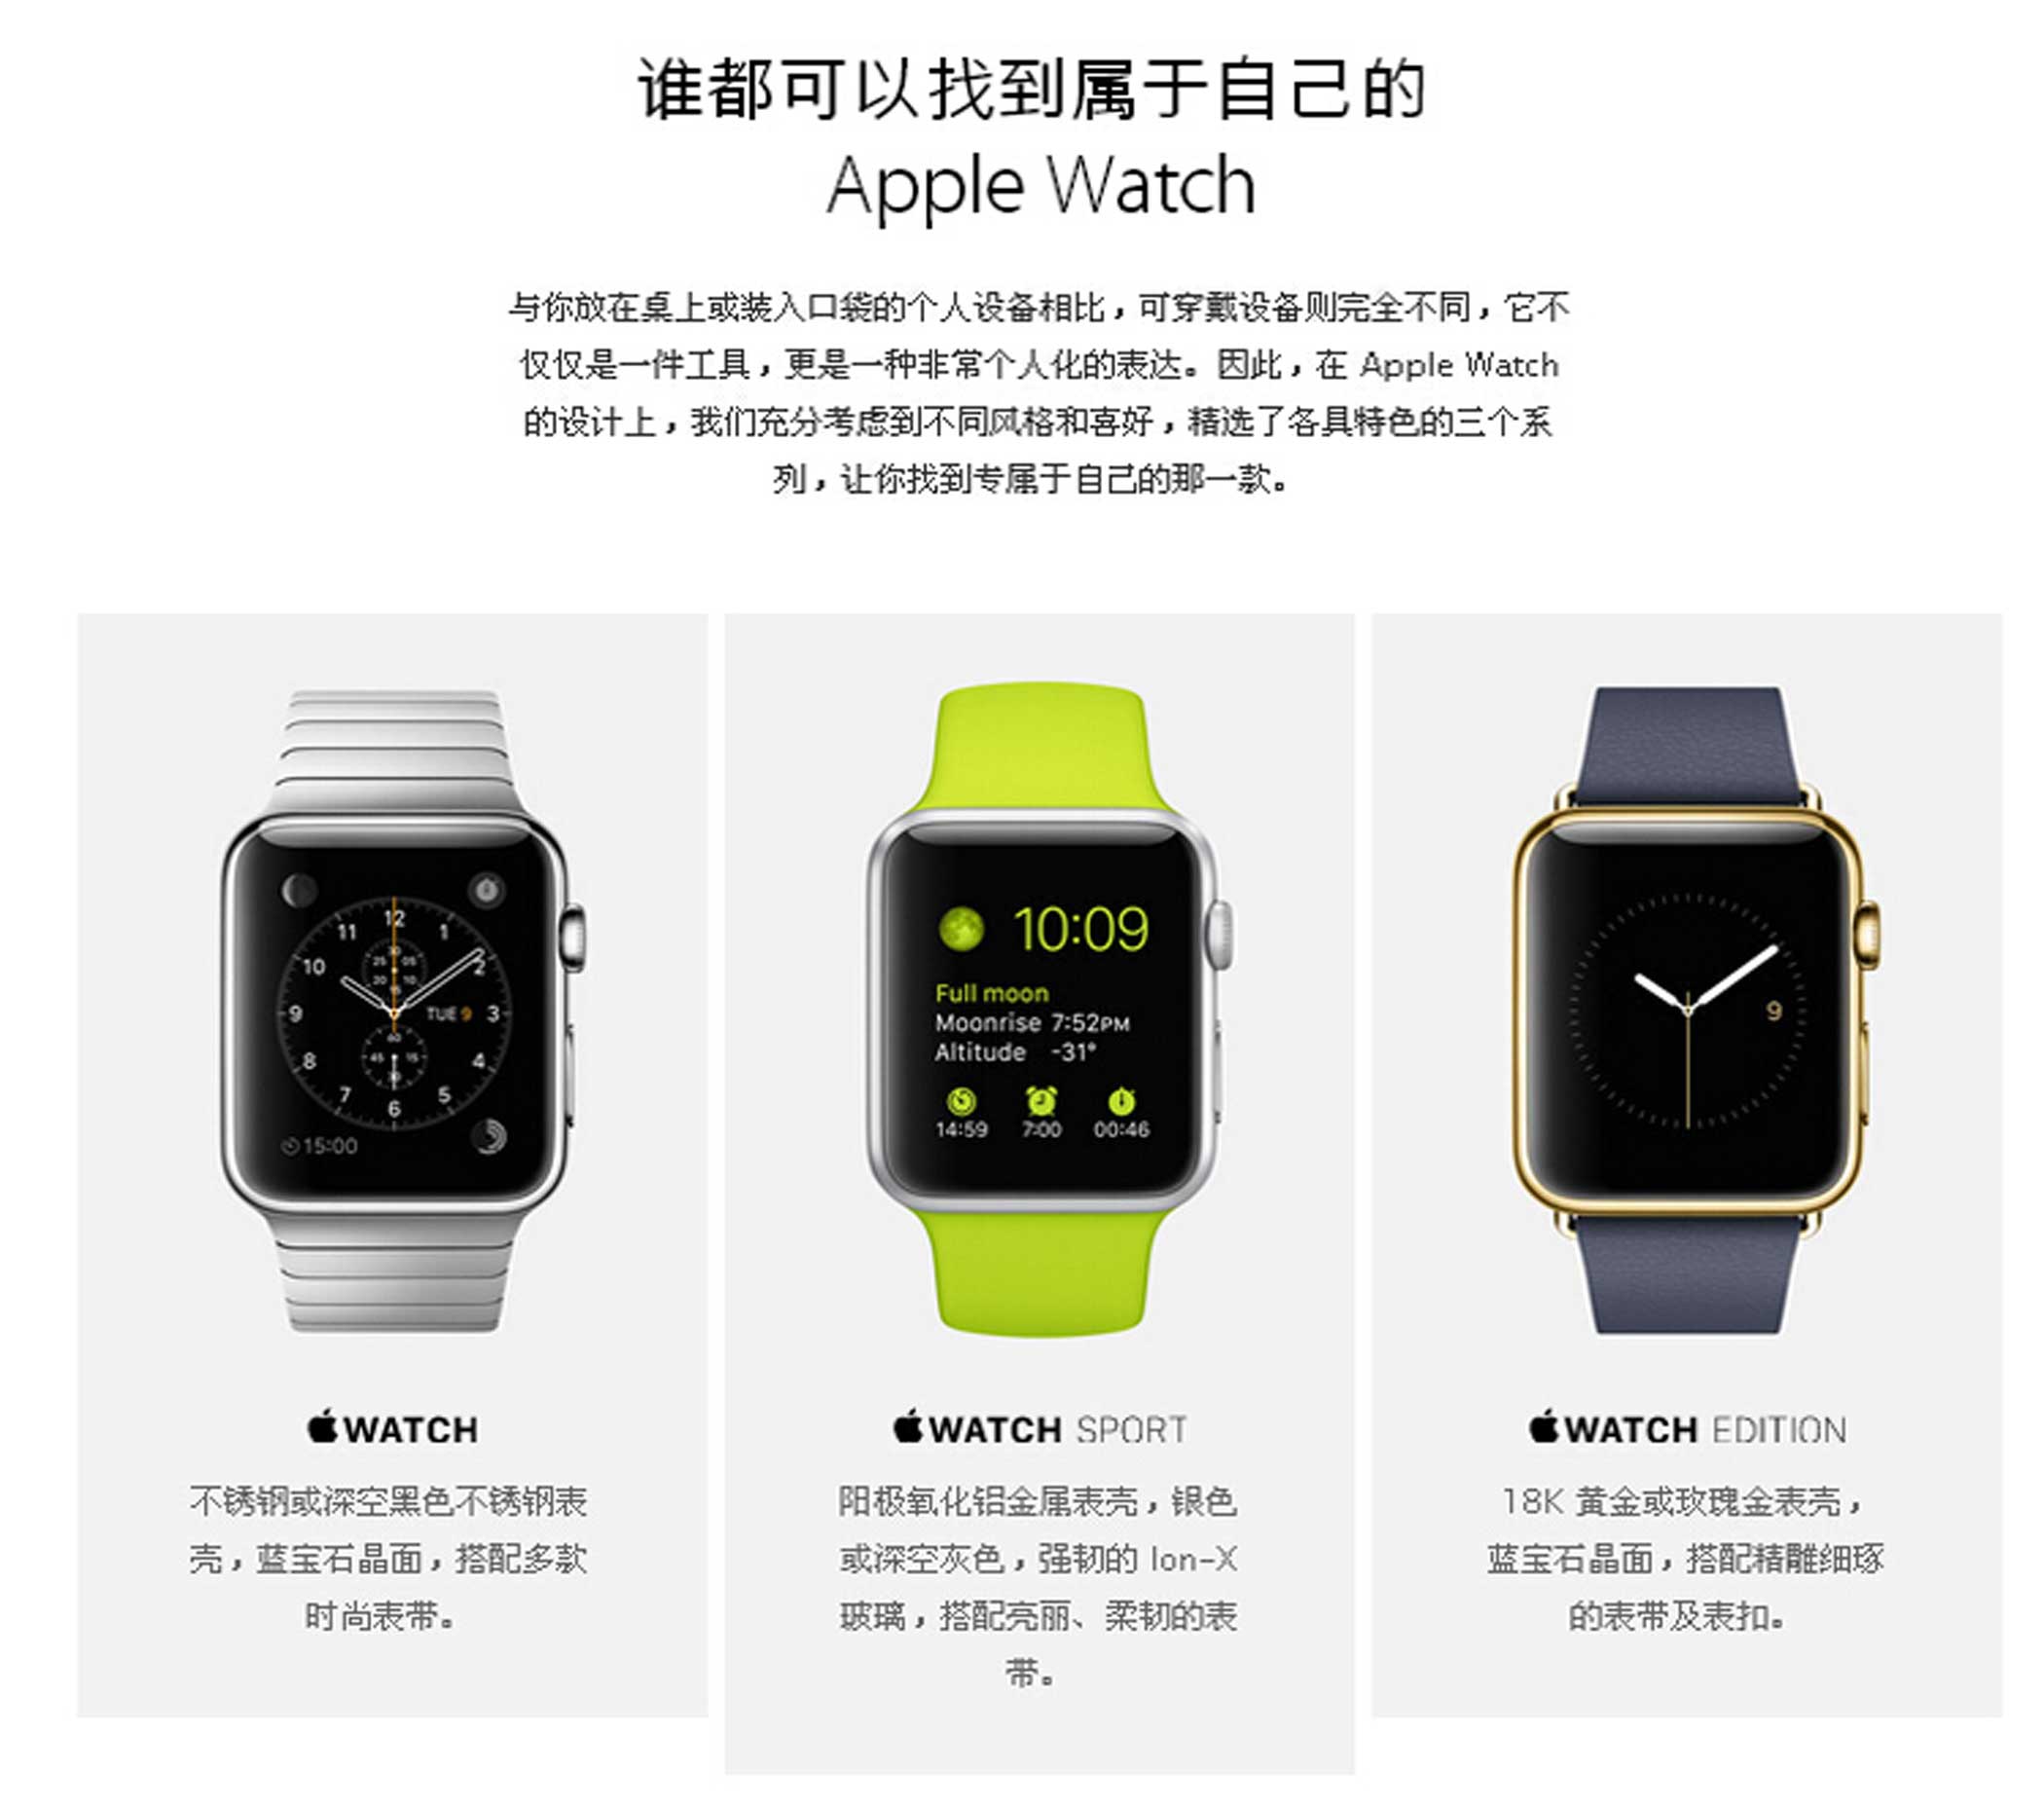 Similar to Apple's Watch it comes in Standard, Sport, and Edition versions.